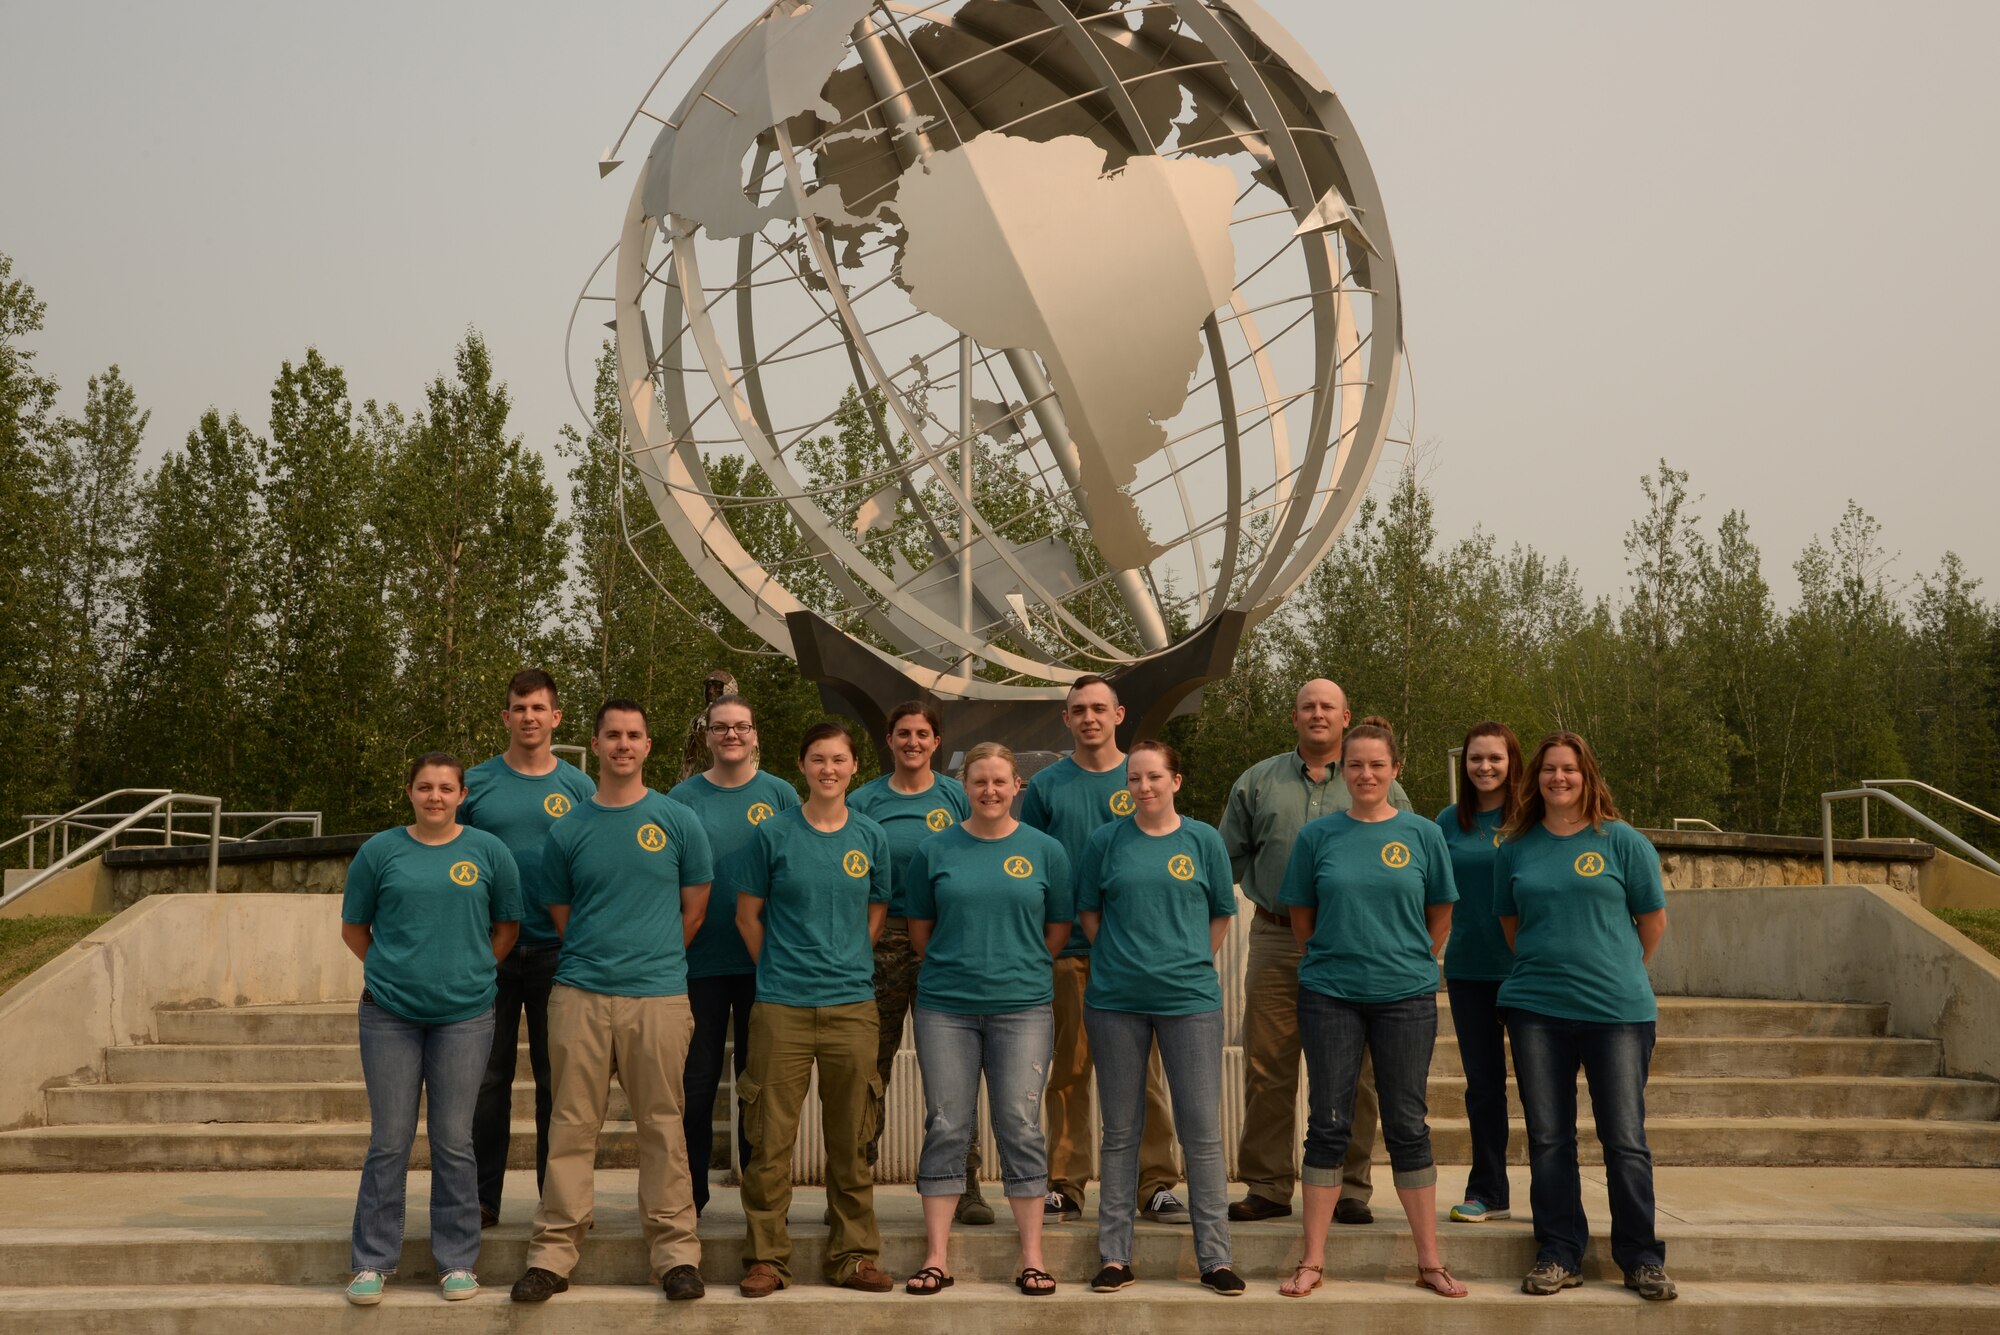 Victim Advocates assigned to the 354th Fighter Wing pose for a group photo June 25, 2015, at Eielson Air Force Base, Alaska. The Eielson Sexual Assault Prevention and Response office is supported by 17 victim advocates across the base. (U.S. Air Force photo by Staff Sgt. Kirsten Wicker/Released)